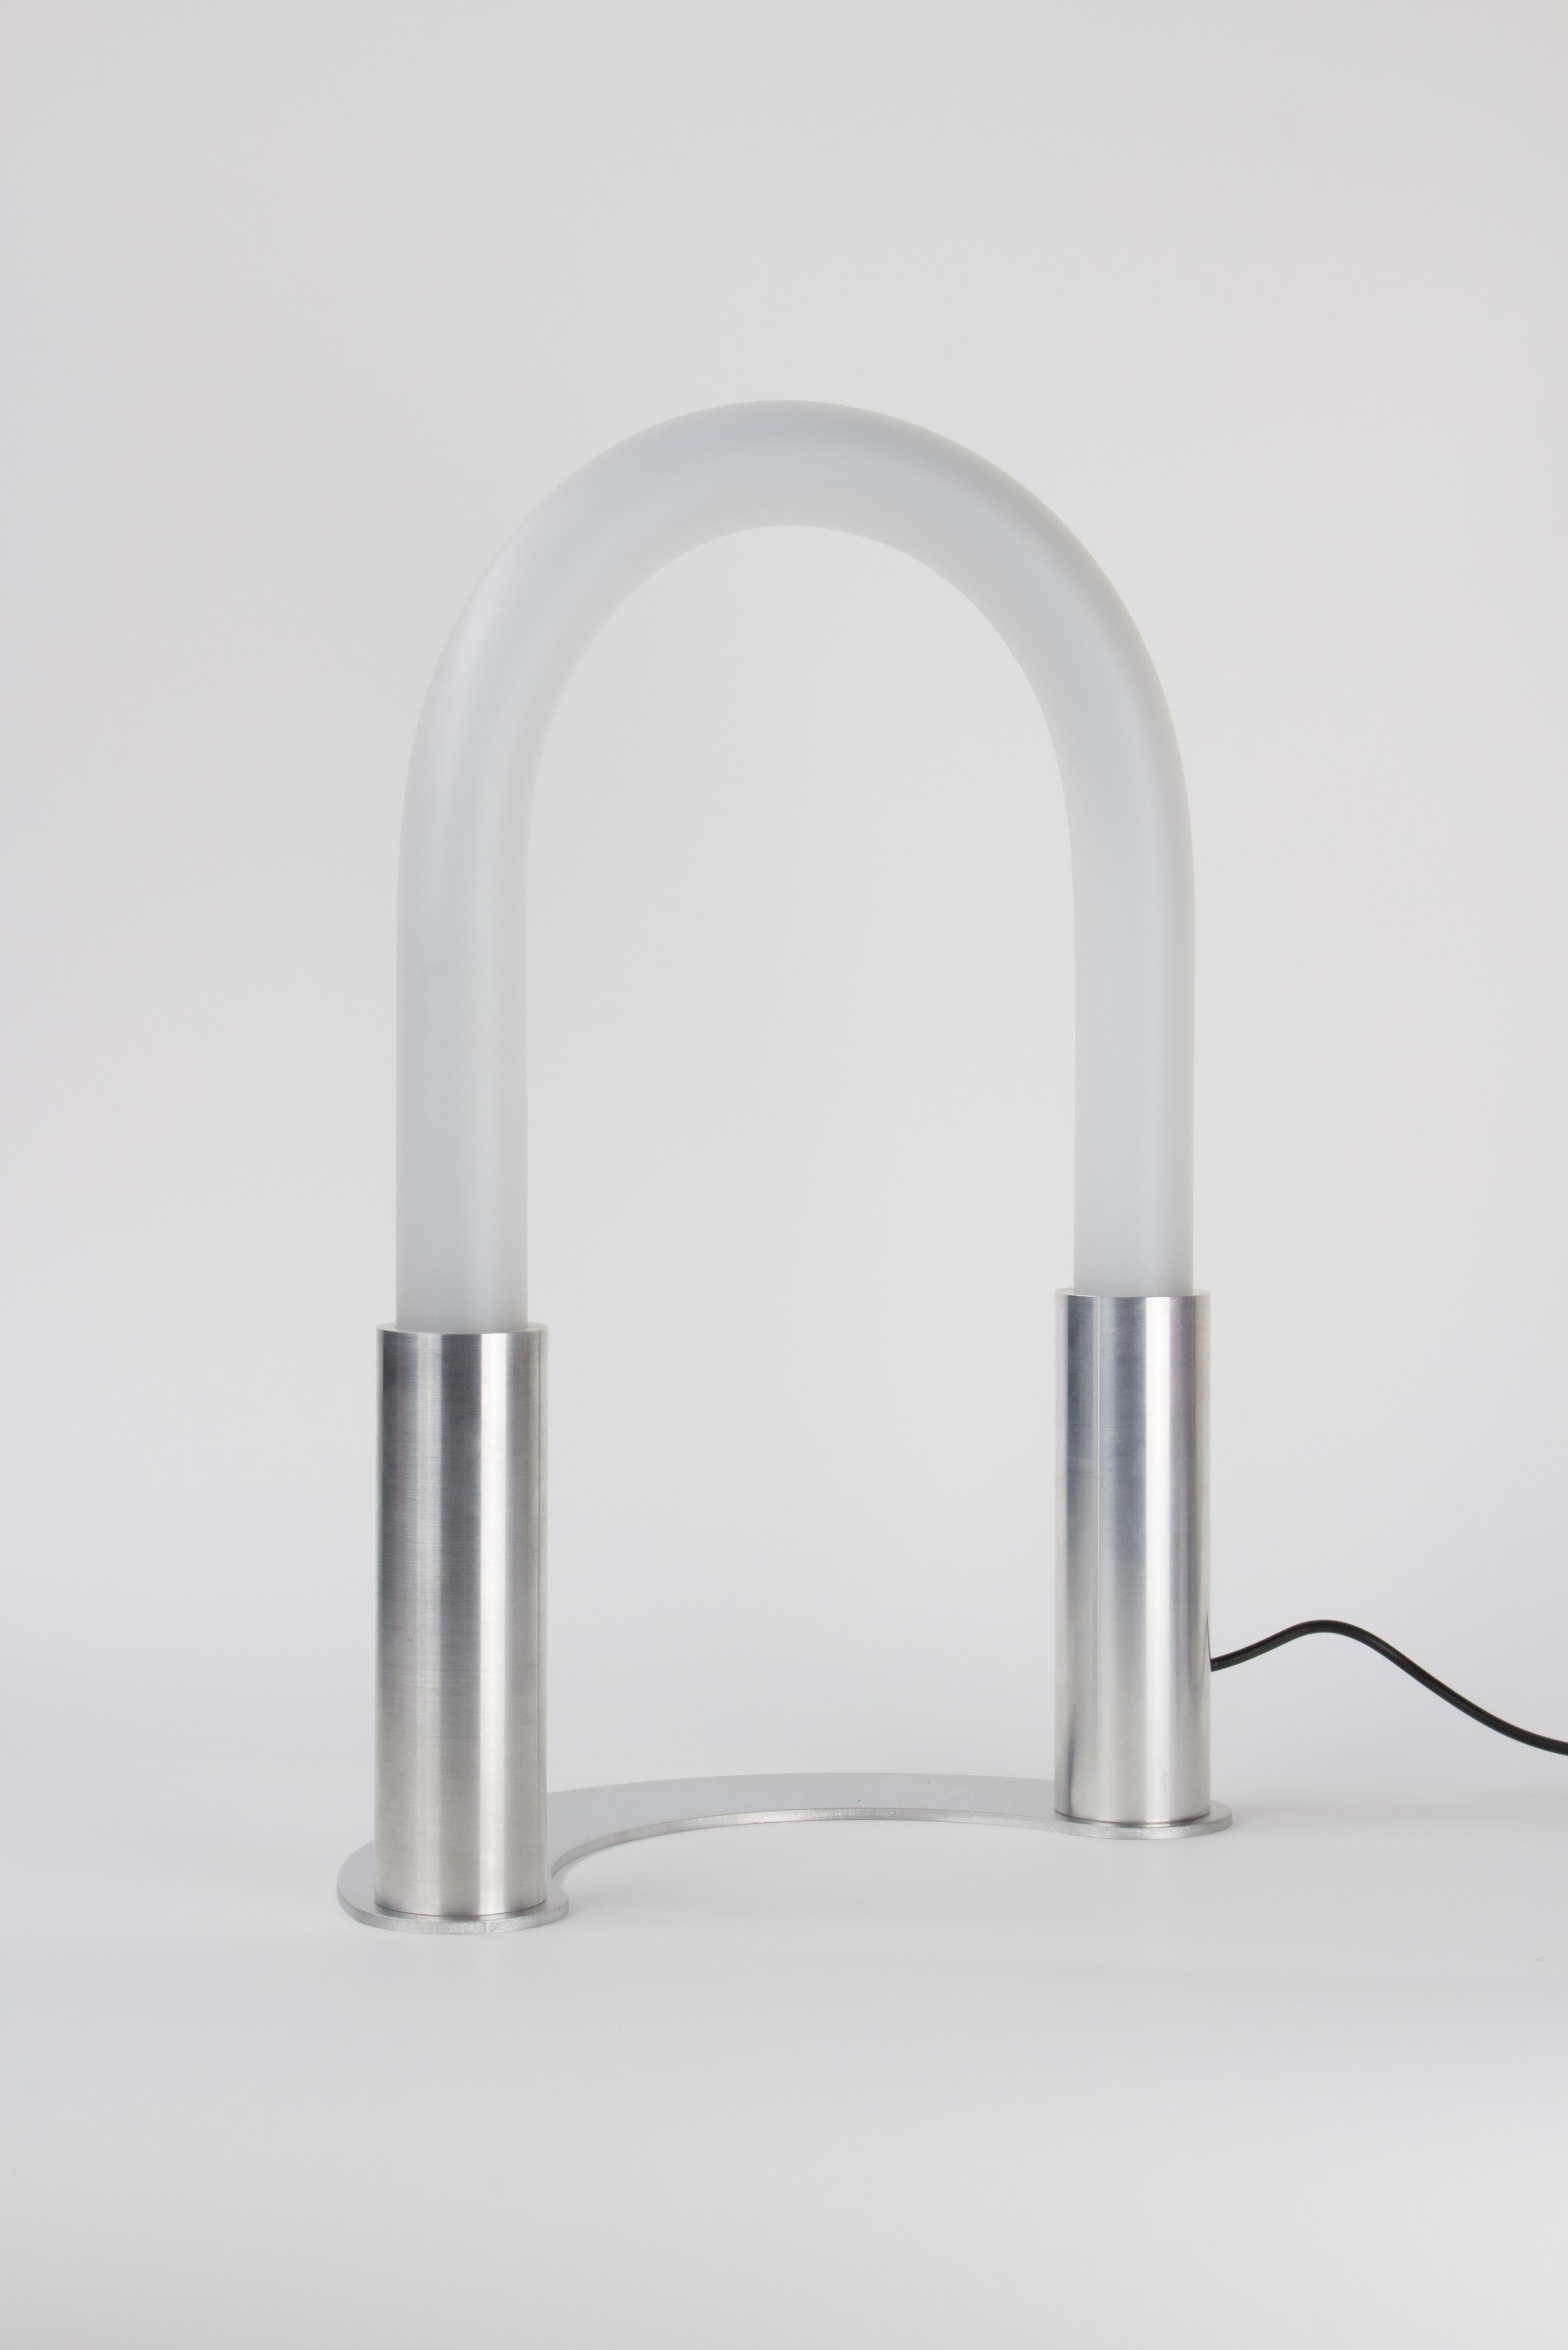 Mini Arceo table lamp by Joachim-Morineau Studio
Dimensions: W 15 x D 25 x H 35 cm.
Materials: Aluminium tubes and sheets, LED 360 light, satin acrylic tubes.

Mini Arceo is a reproduction of our ARCEO installations as a table lamp.

Mini